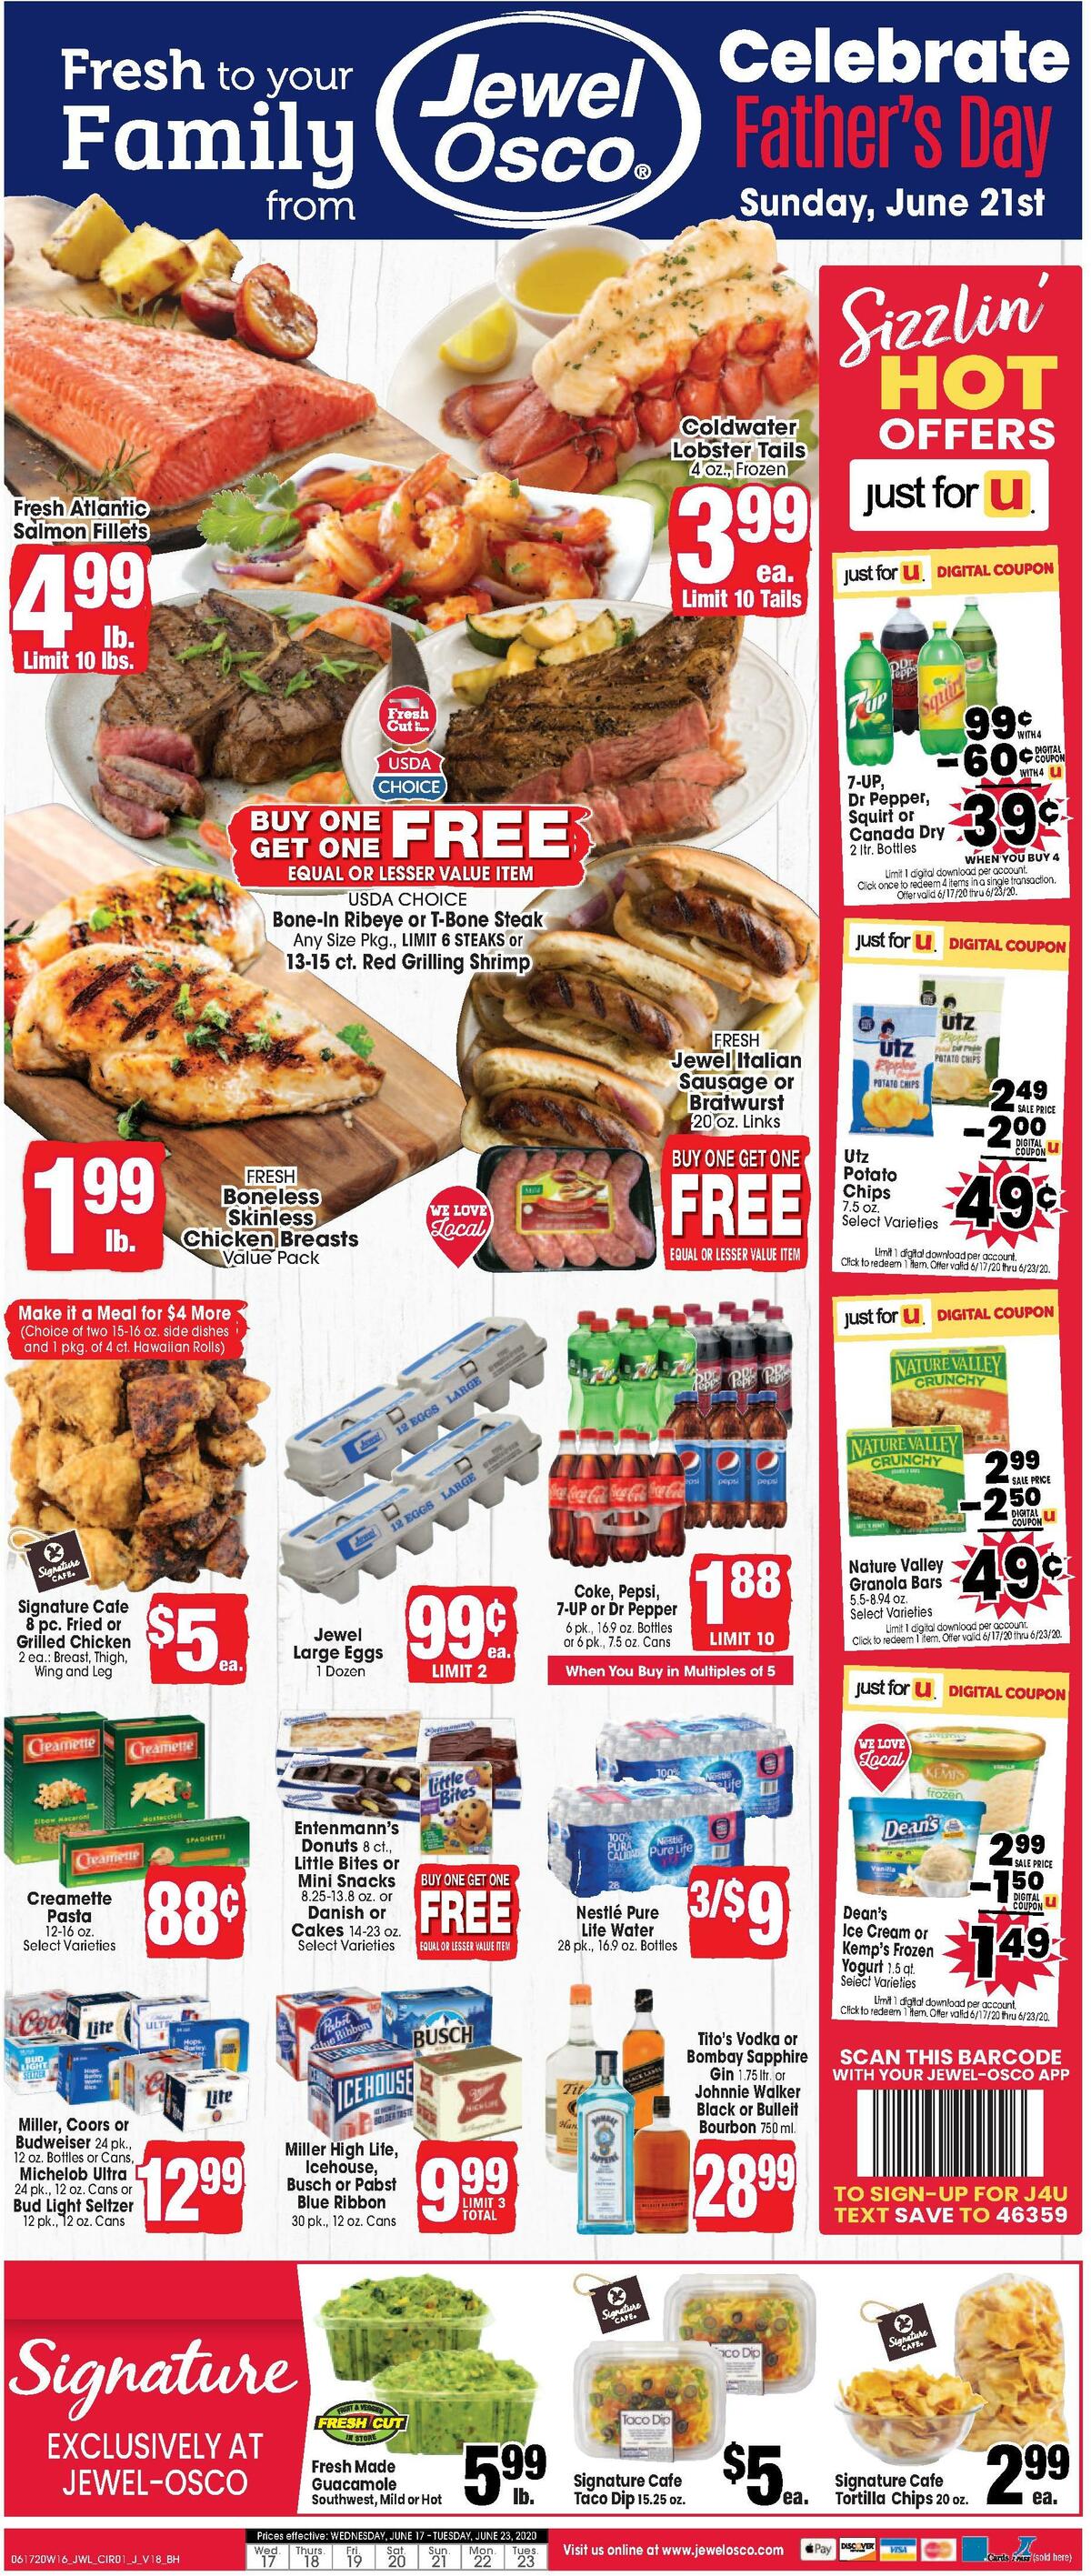 Jewel Osco Weekly Ad from June 17